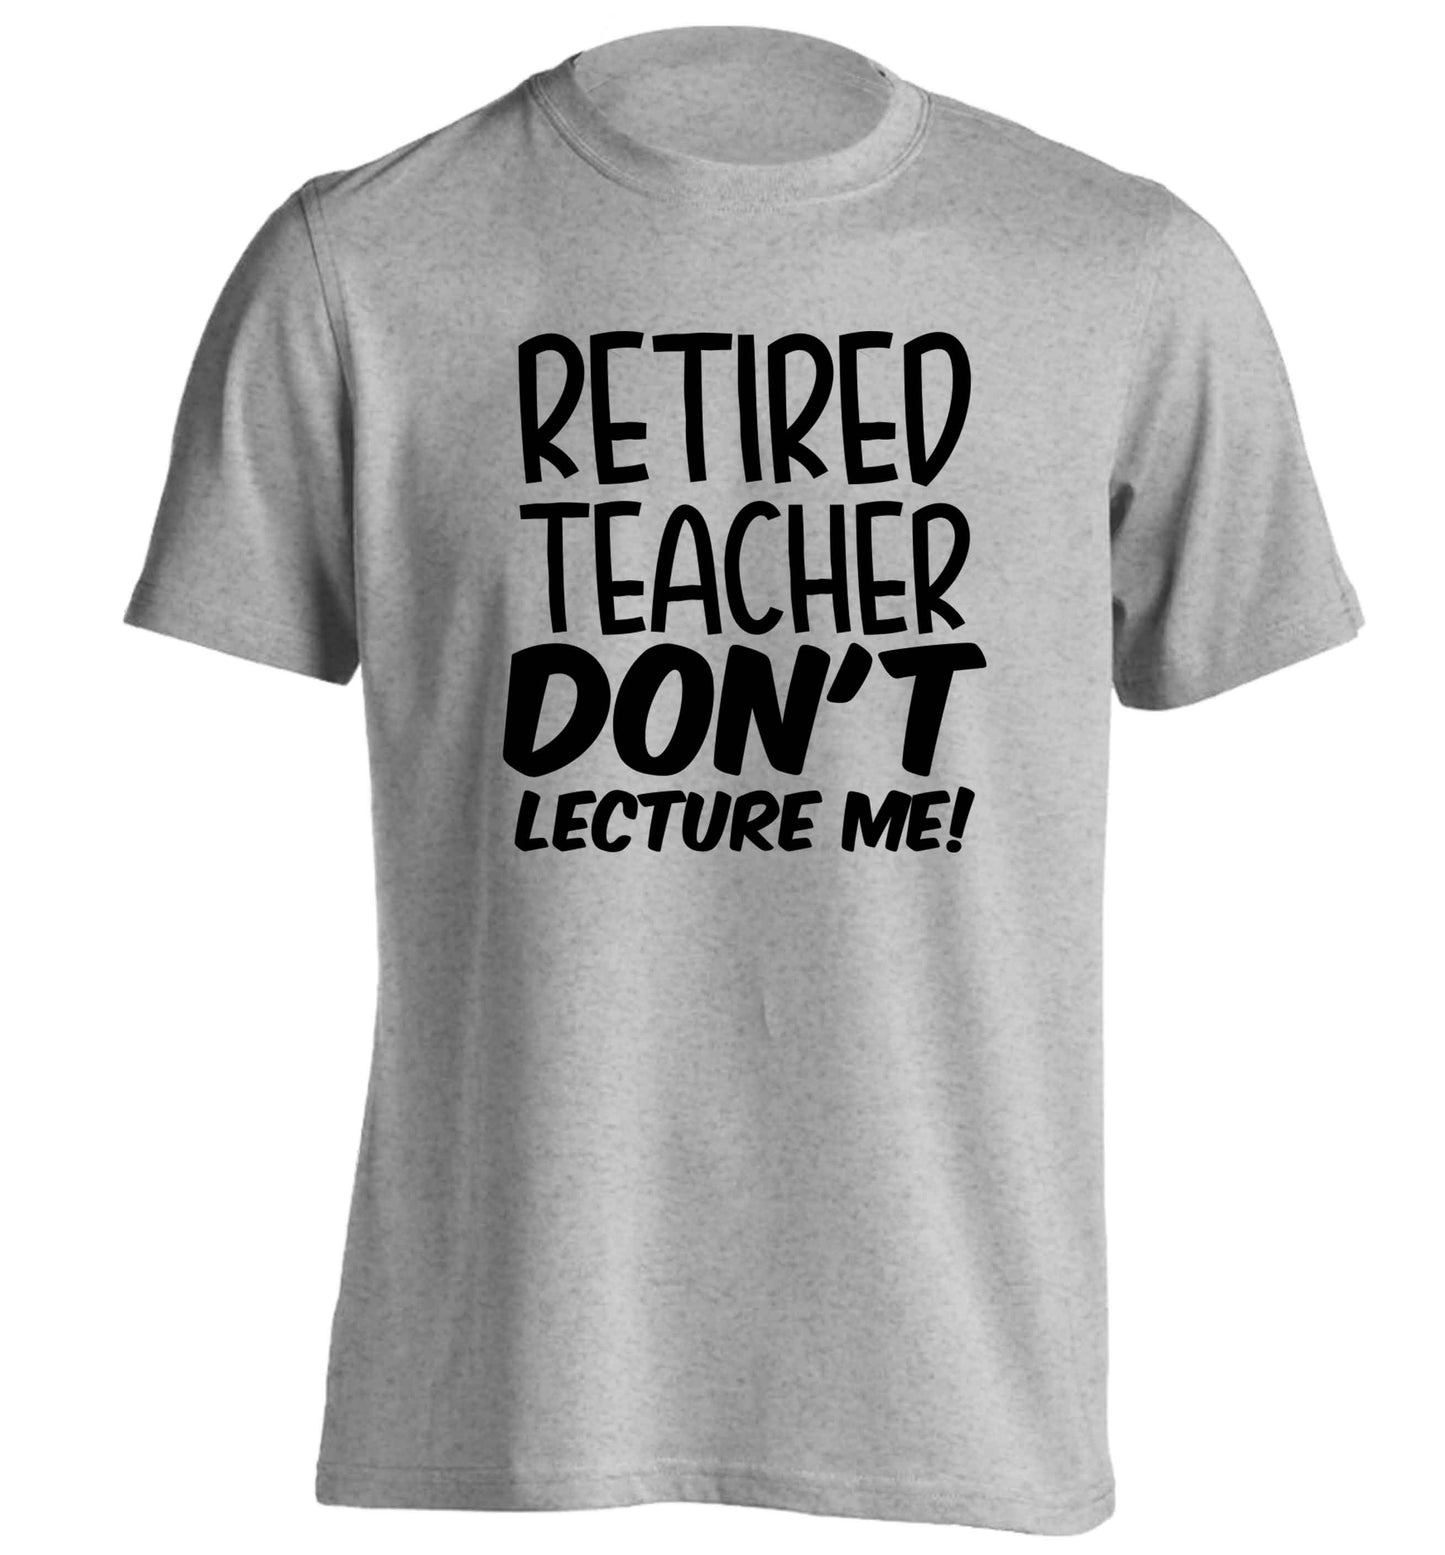 Retired teacher don't lecture me! adults unisex grey Tshirt 2XL